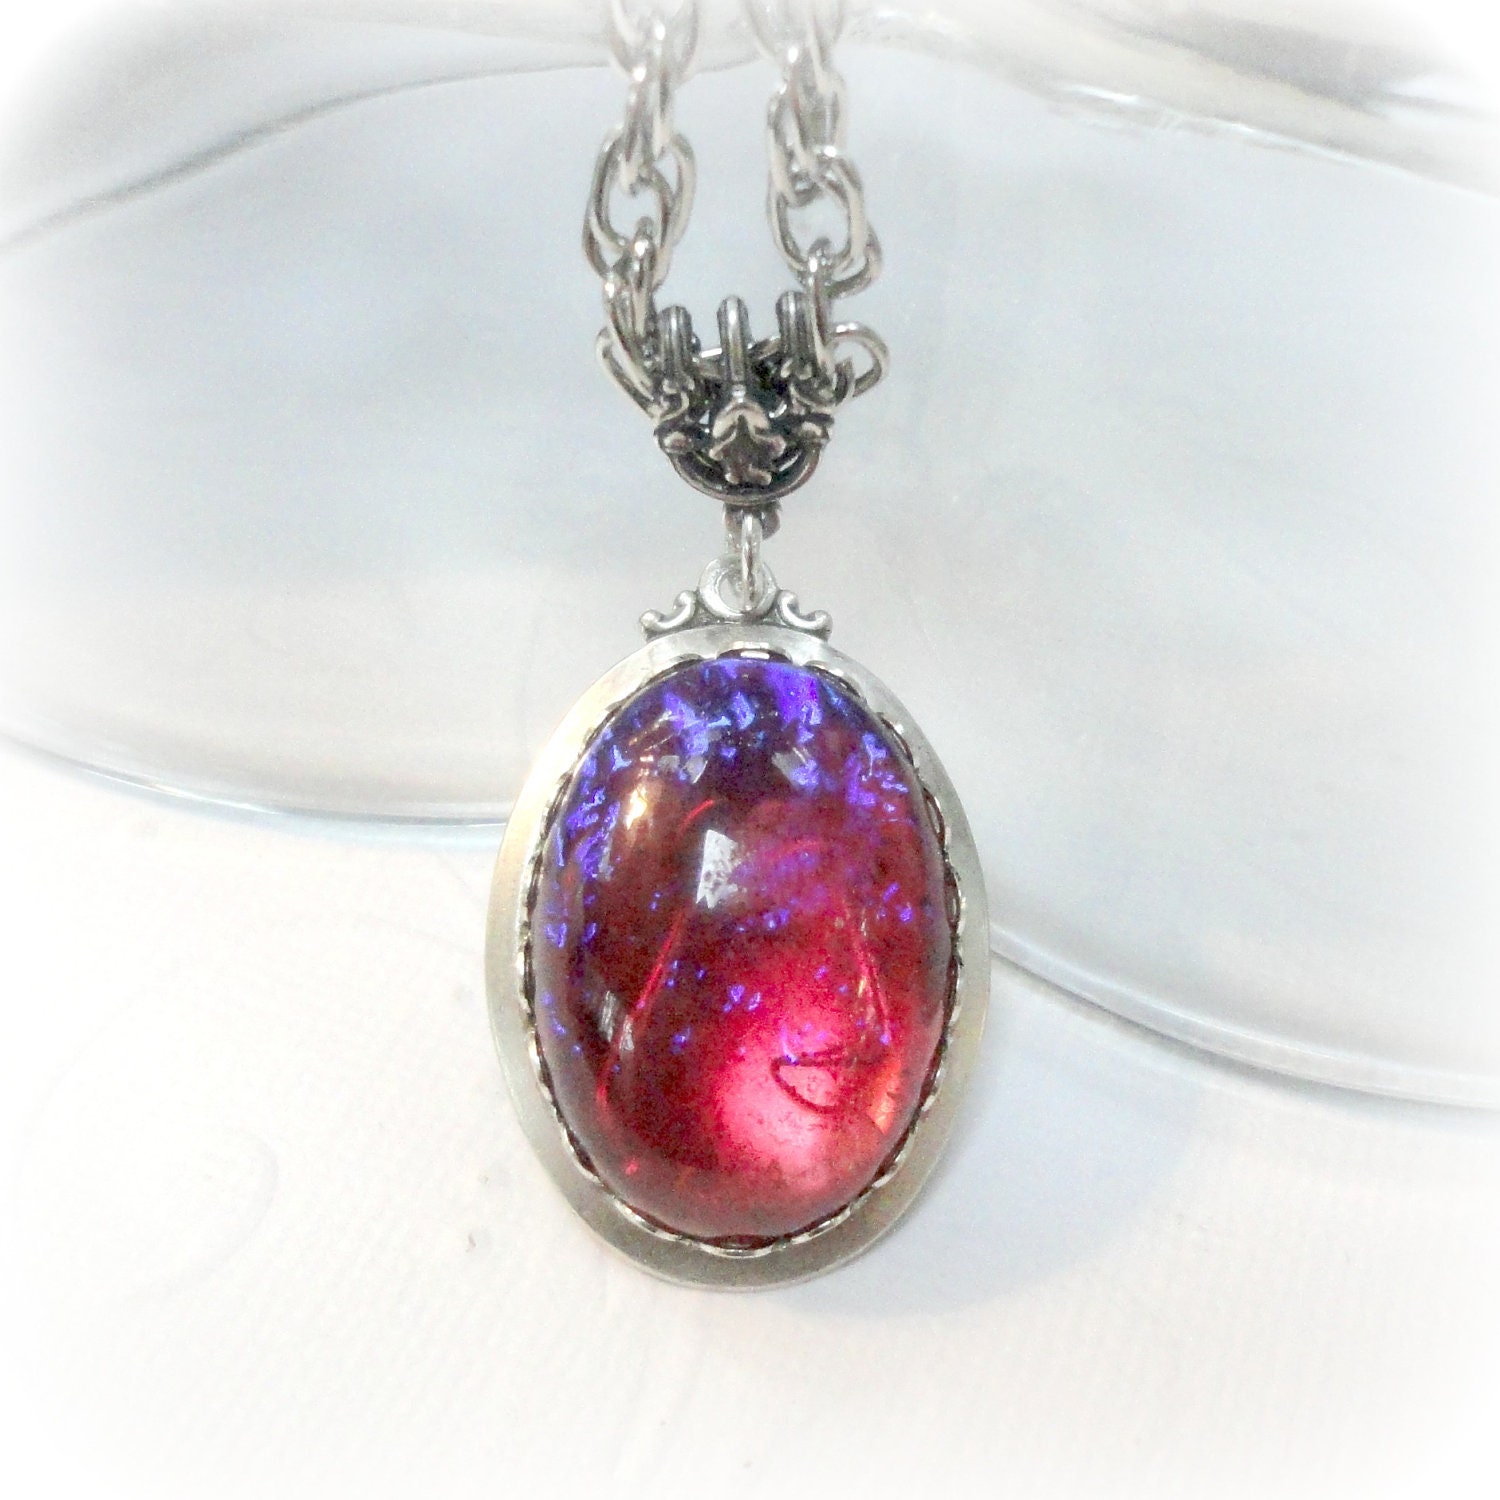 Fire Opal Necklace Dragons Breath Necklace Purple by pink80sgirl